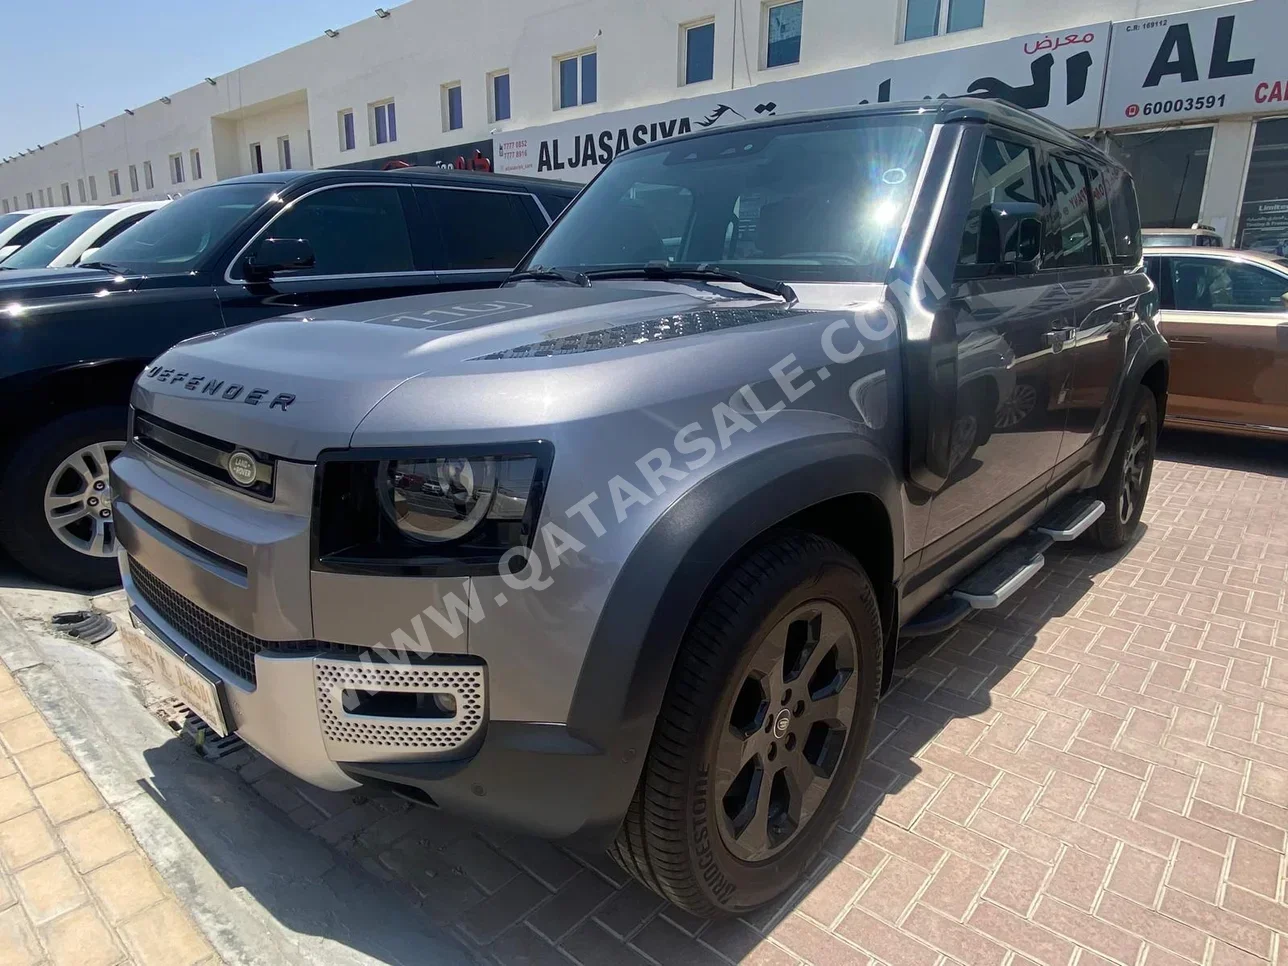 Land Rover  Defender  2020  Automatic  90,000 Km  6 Cylinder  Four Wheel Drive (4WD)  SUV  Gray